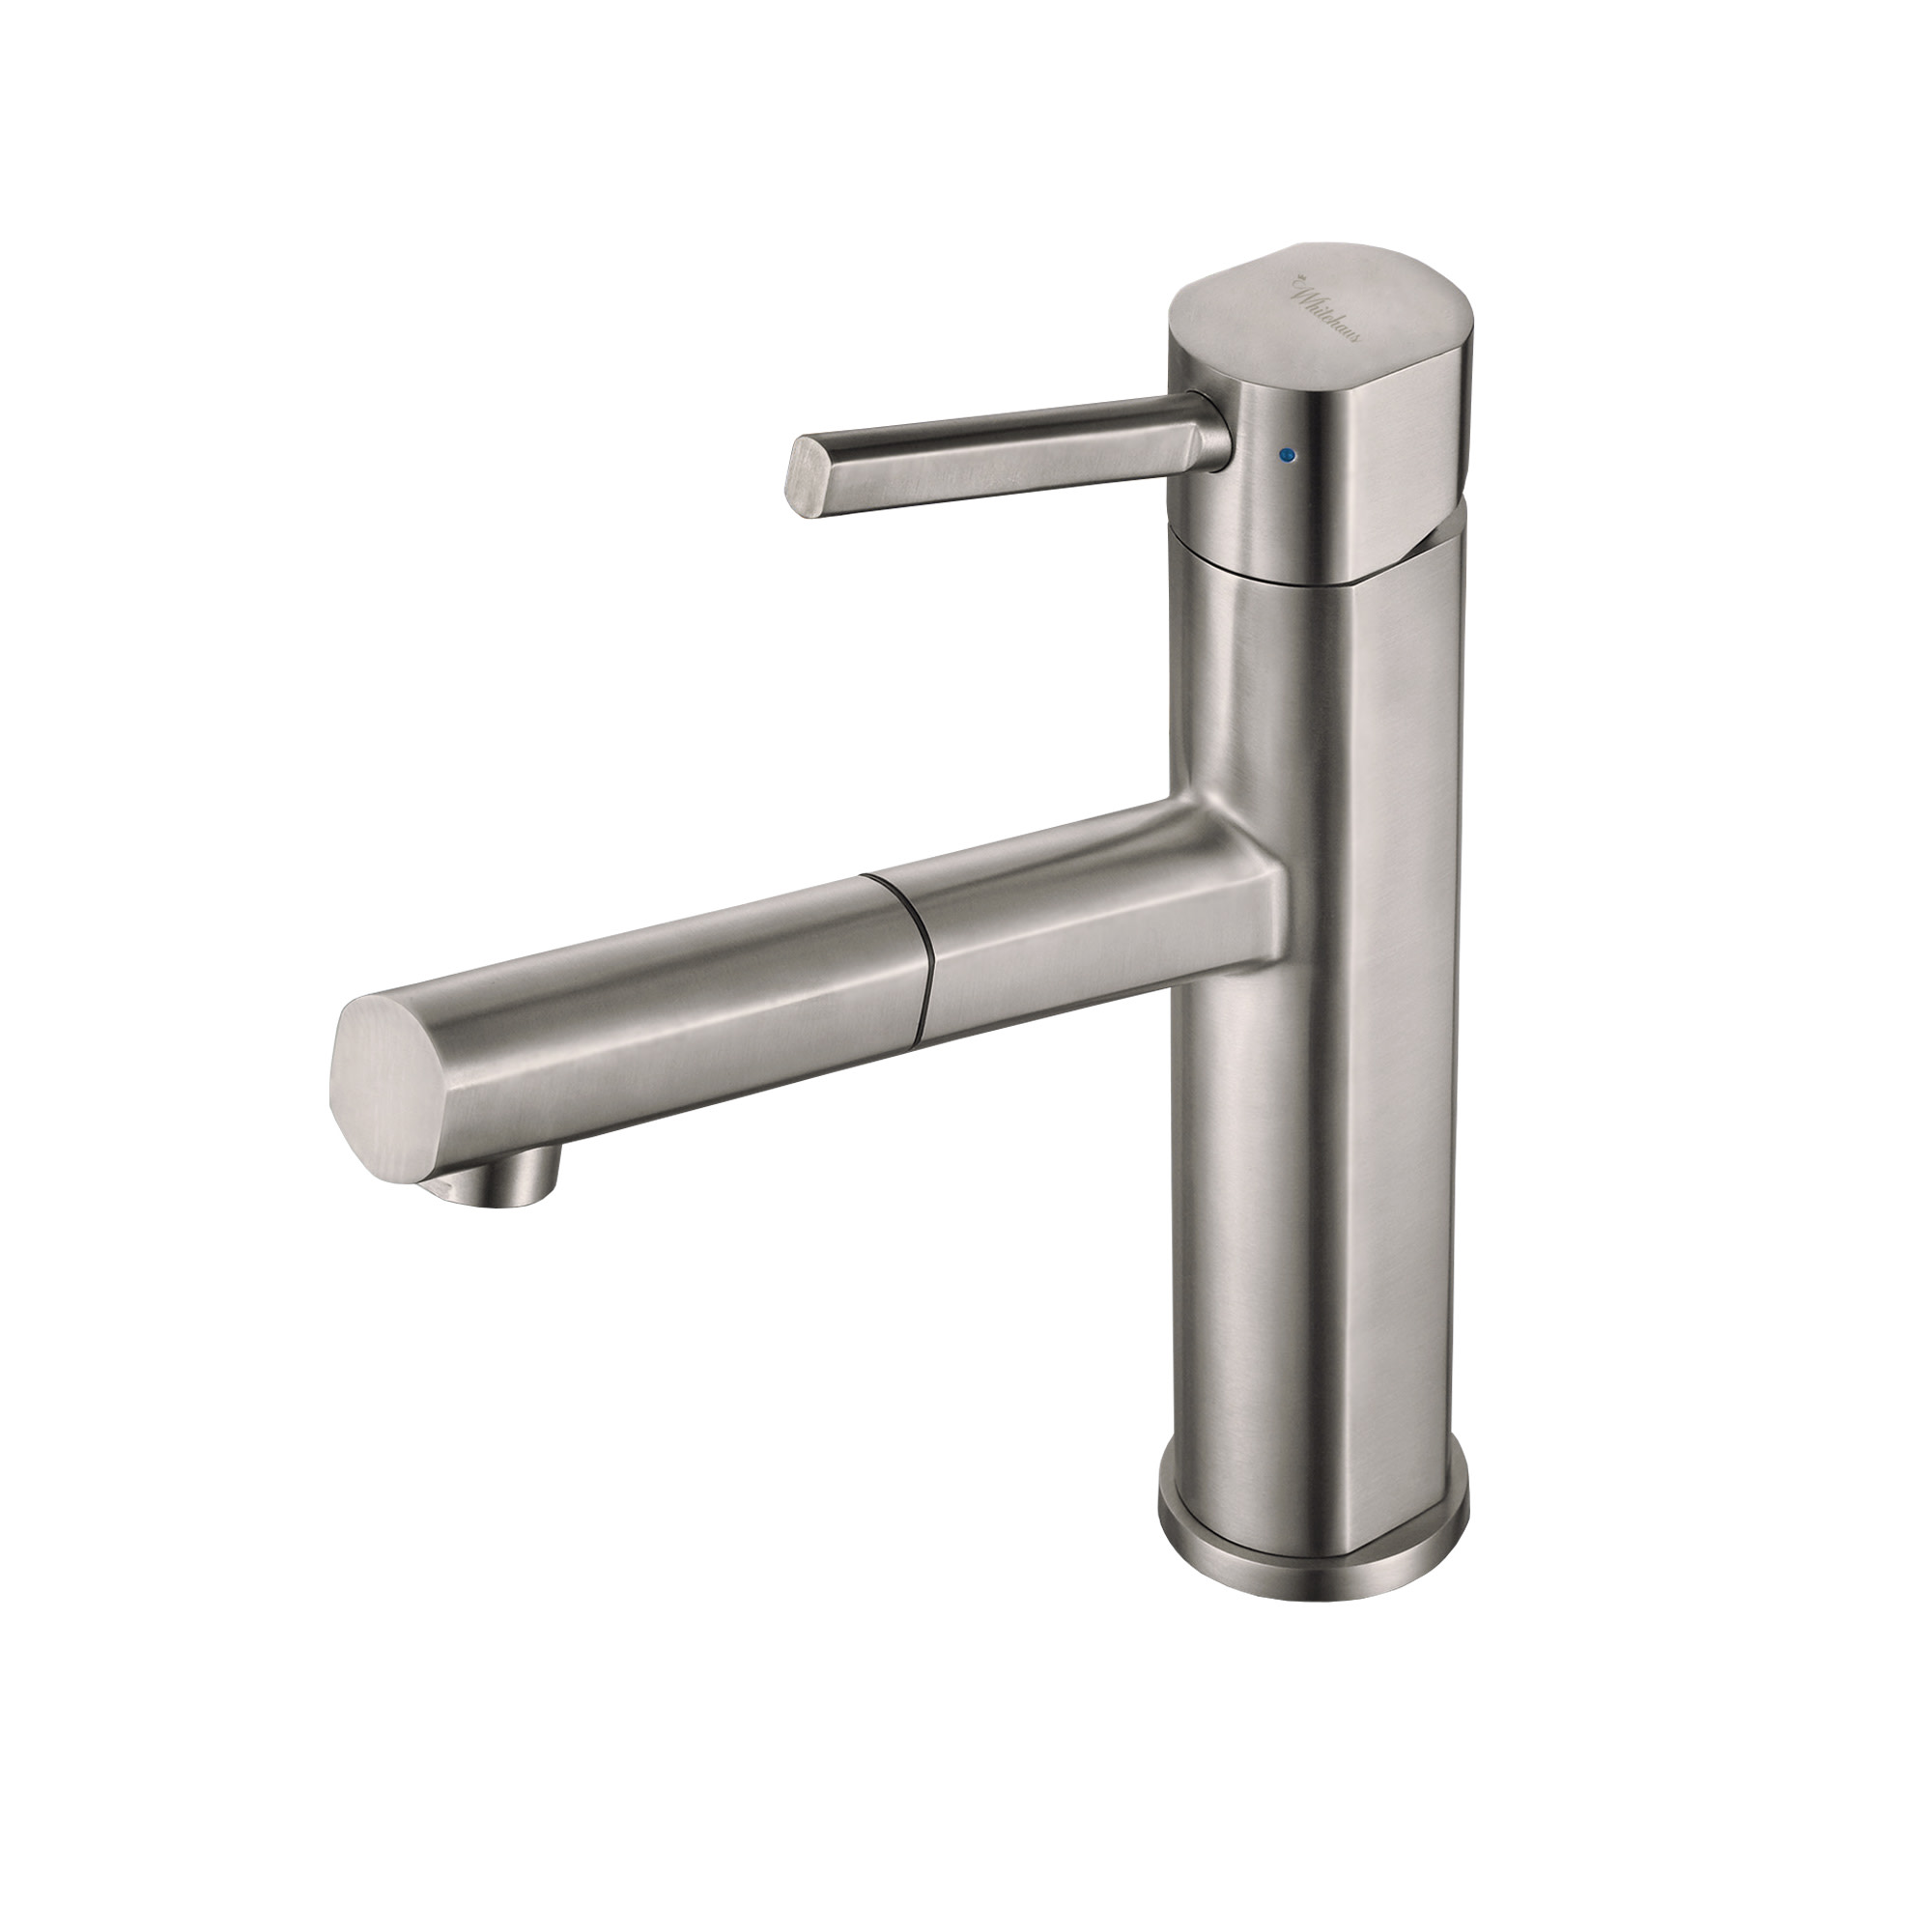 Whitehaus WHS1394-PSK Waterhaus 1 Hole Pull Down Kitchen Faucet - Stainless